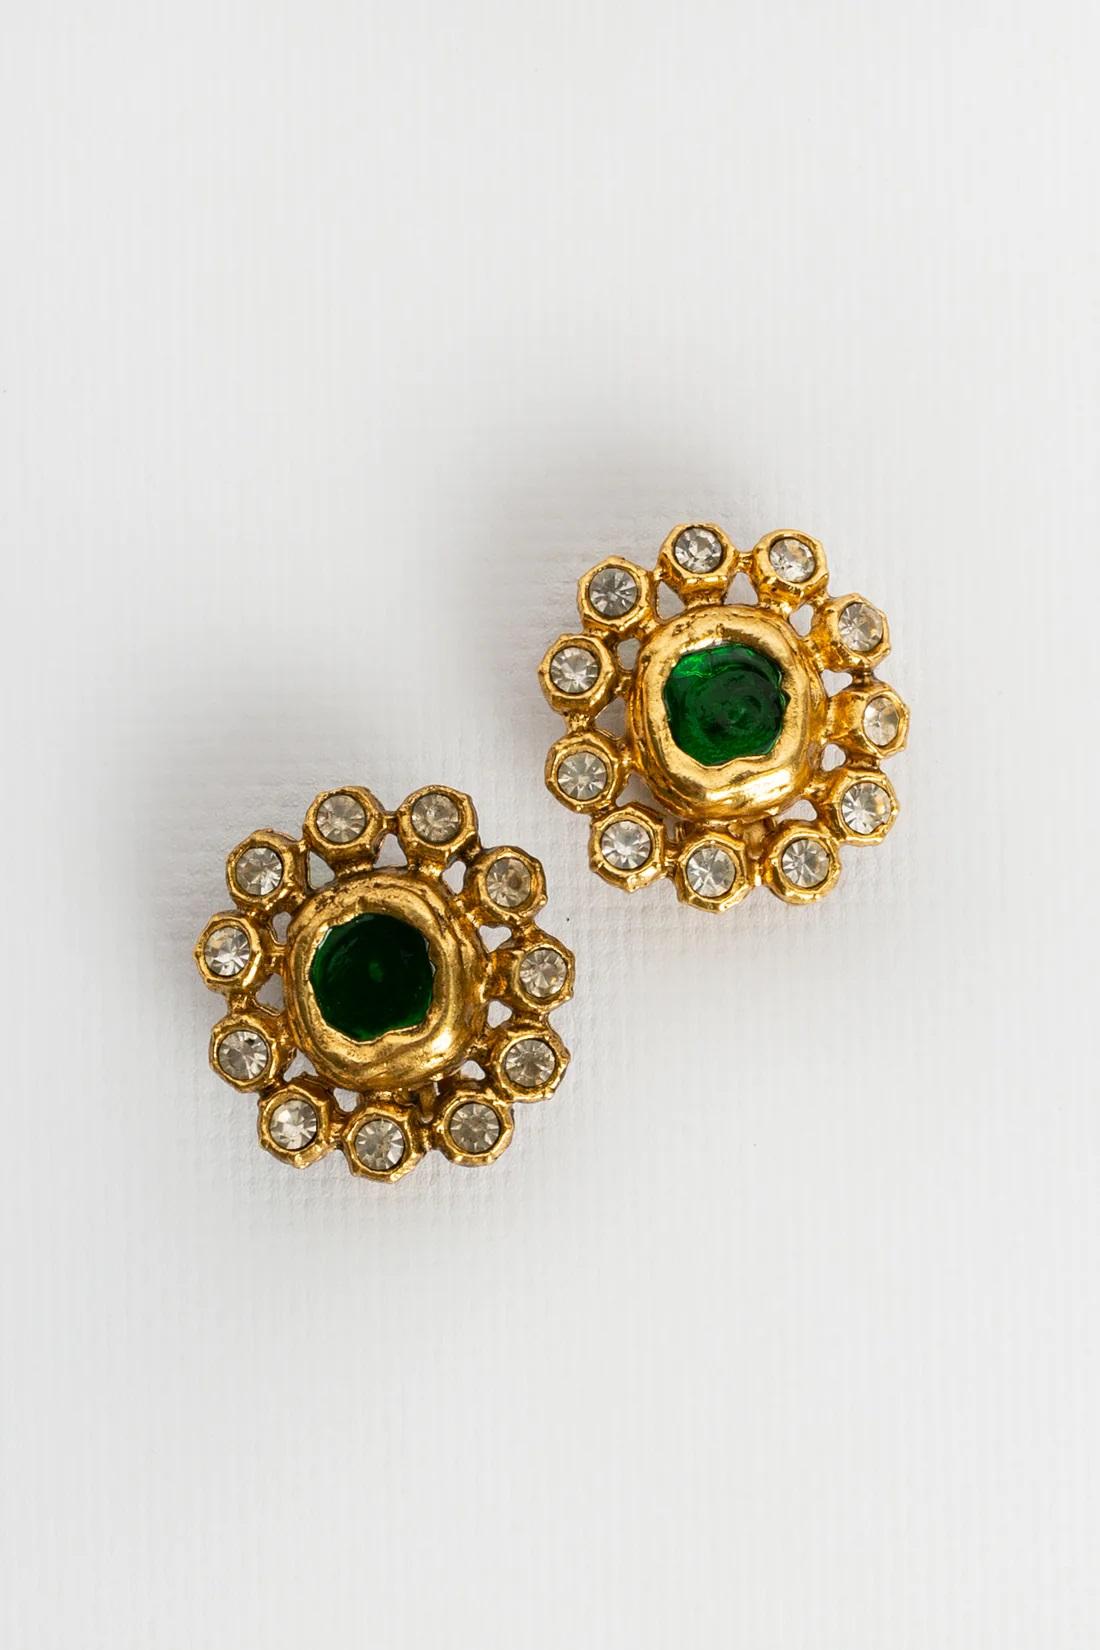 Chanel (Made in France) Clip-on round gilded metal earrings paved with rhinestones and decorated in the center with a green glass paste cabochon.

Additional information:

Dimensions: 
2.5 W x 2.8 H cm (0.98